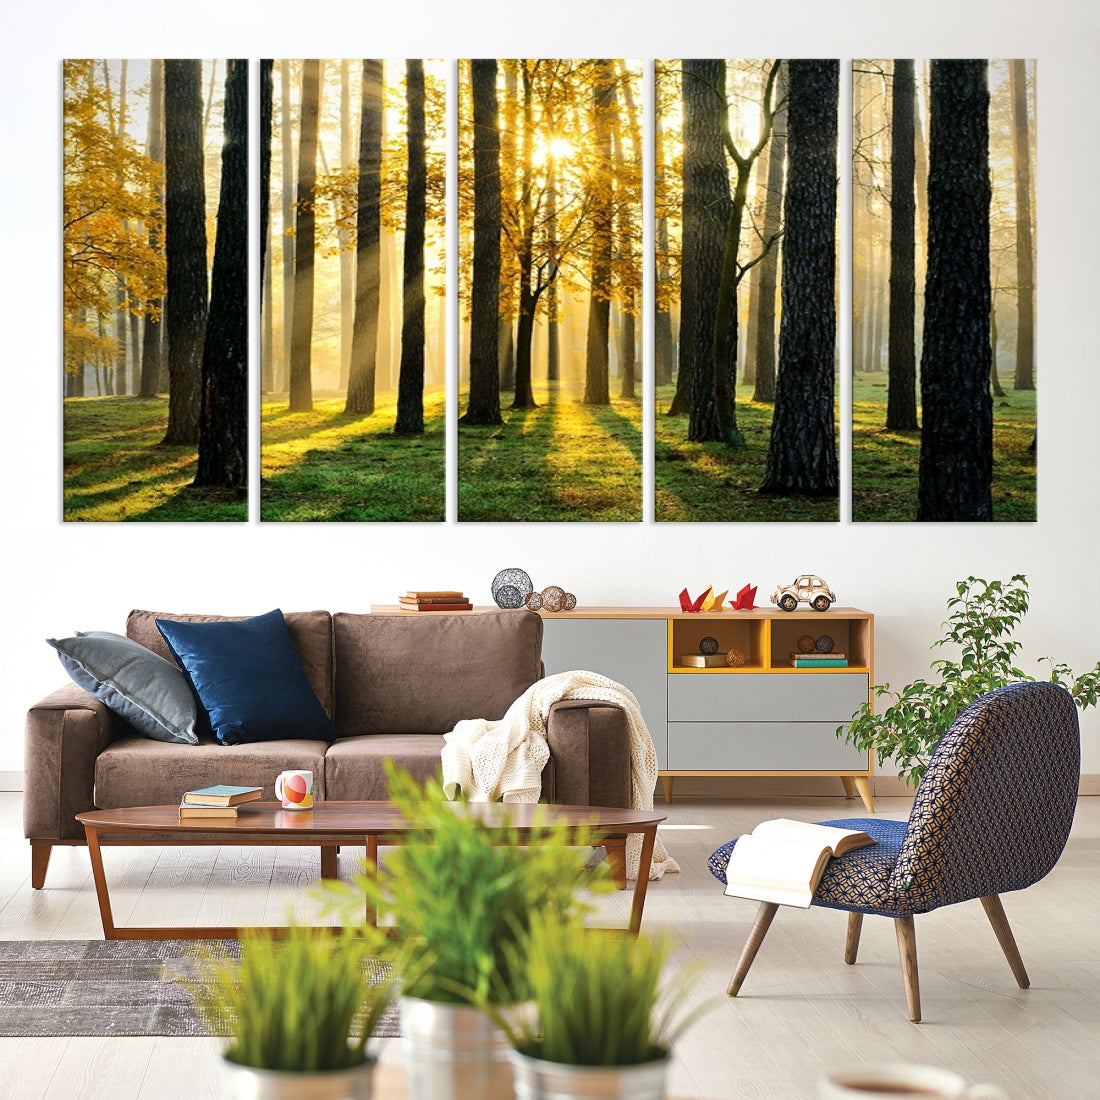 Tall Trees in Forest at Sunset Large Wall Art Landscape Canvas Print